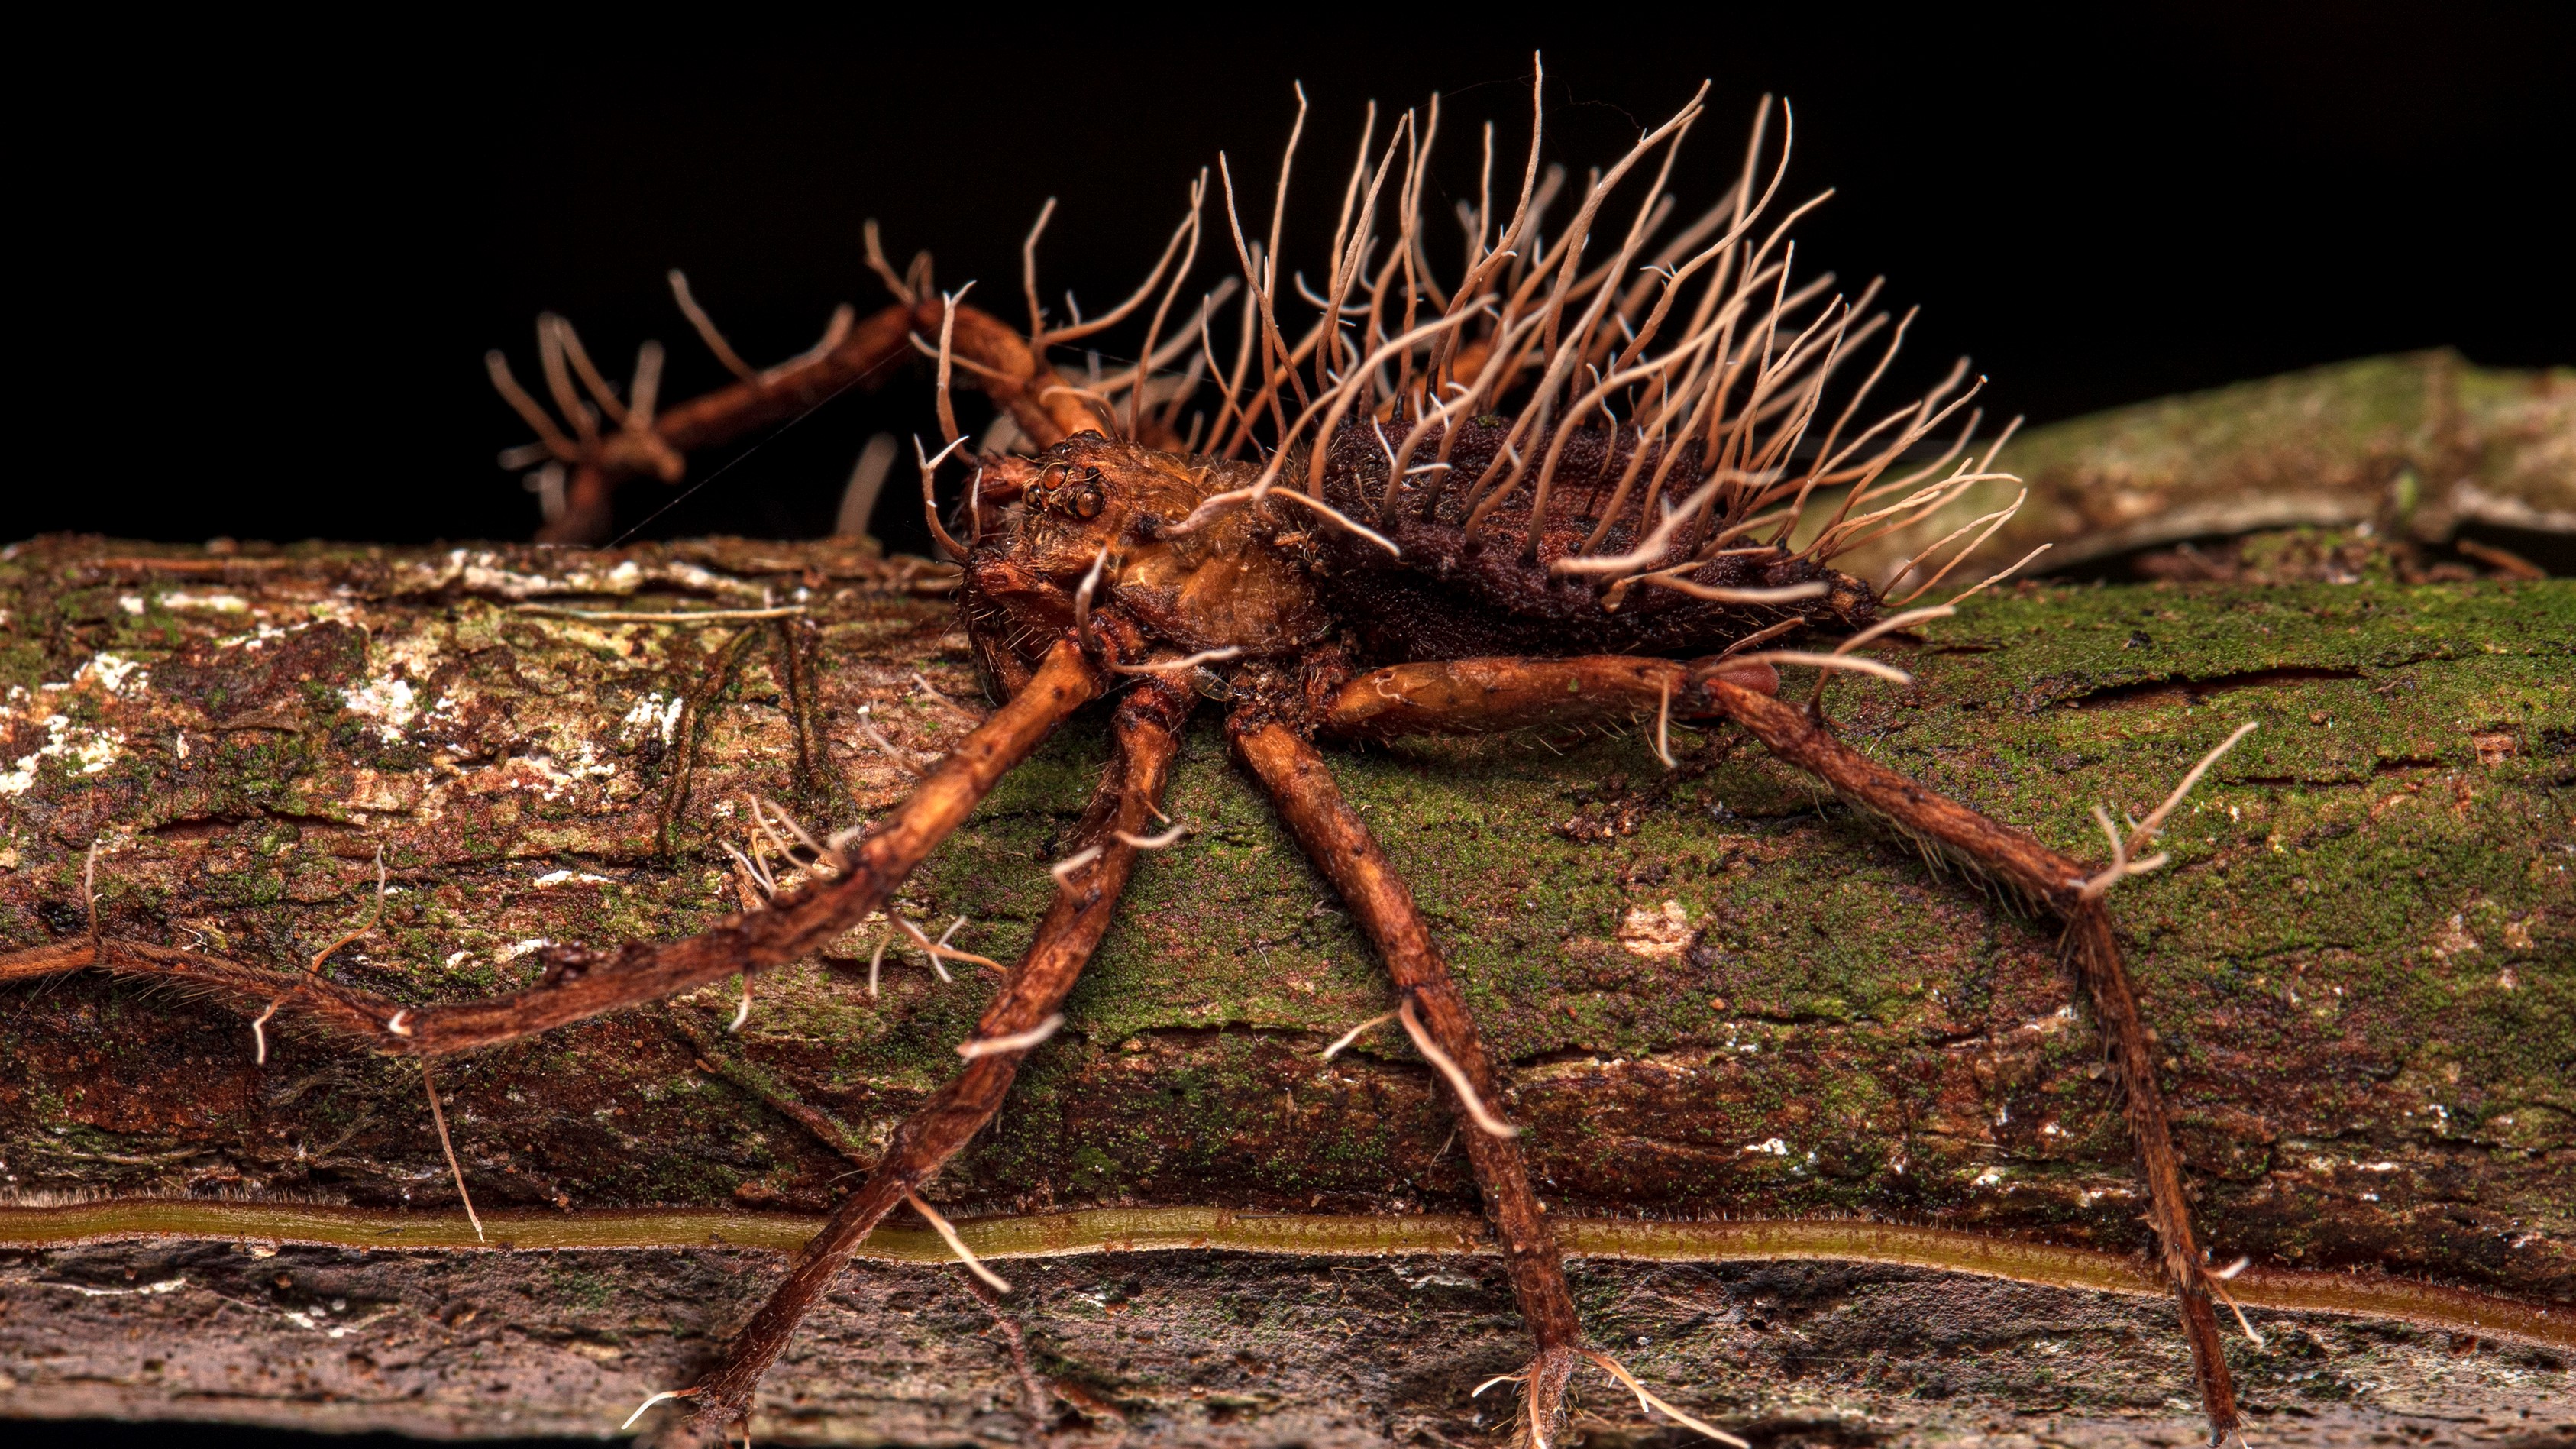 a spider on a piece of wood with a parasitic fungus bursting through its head, legs and body